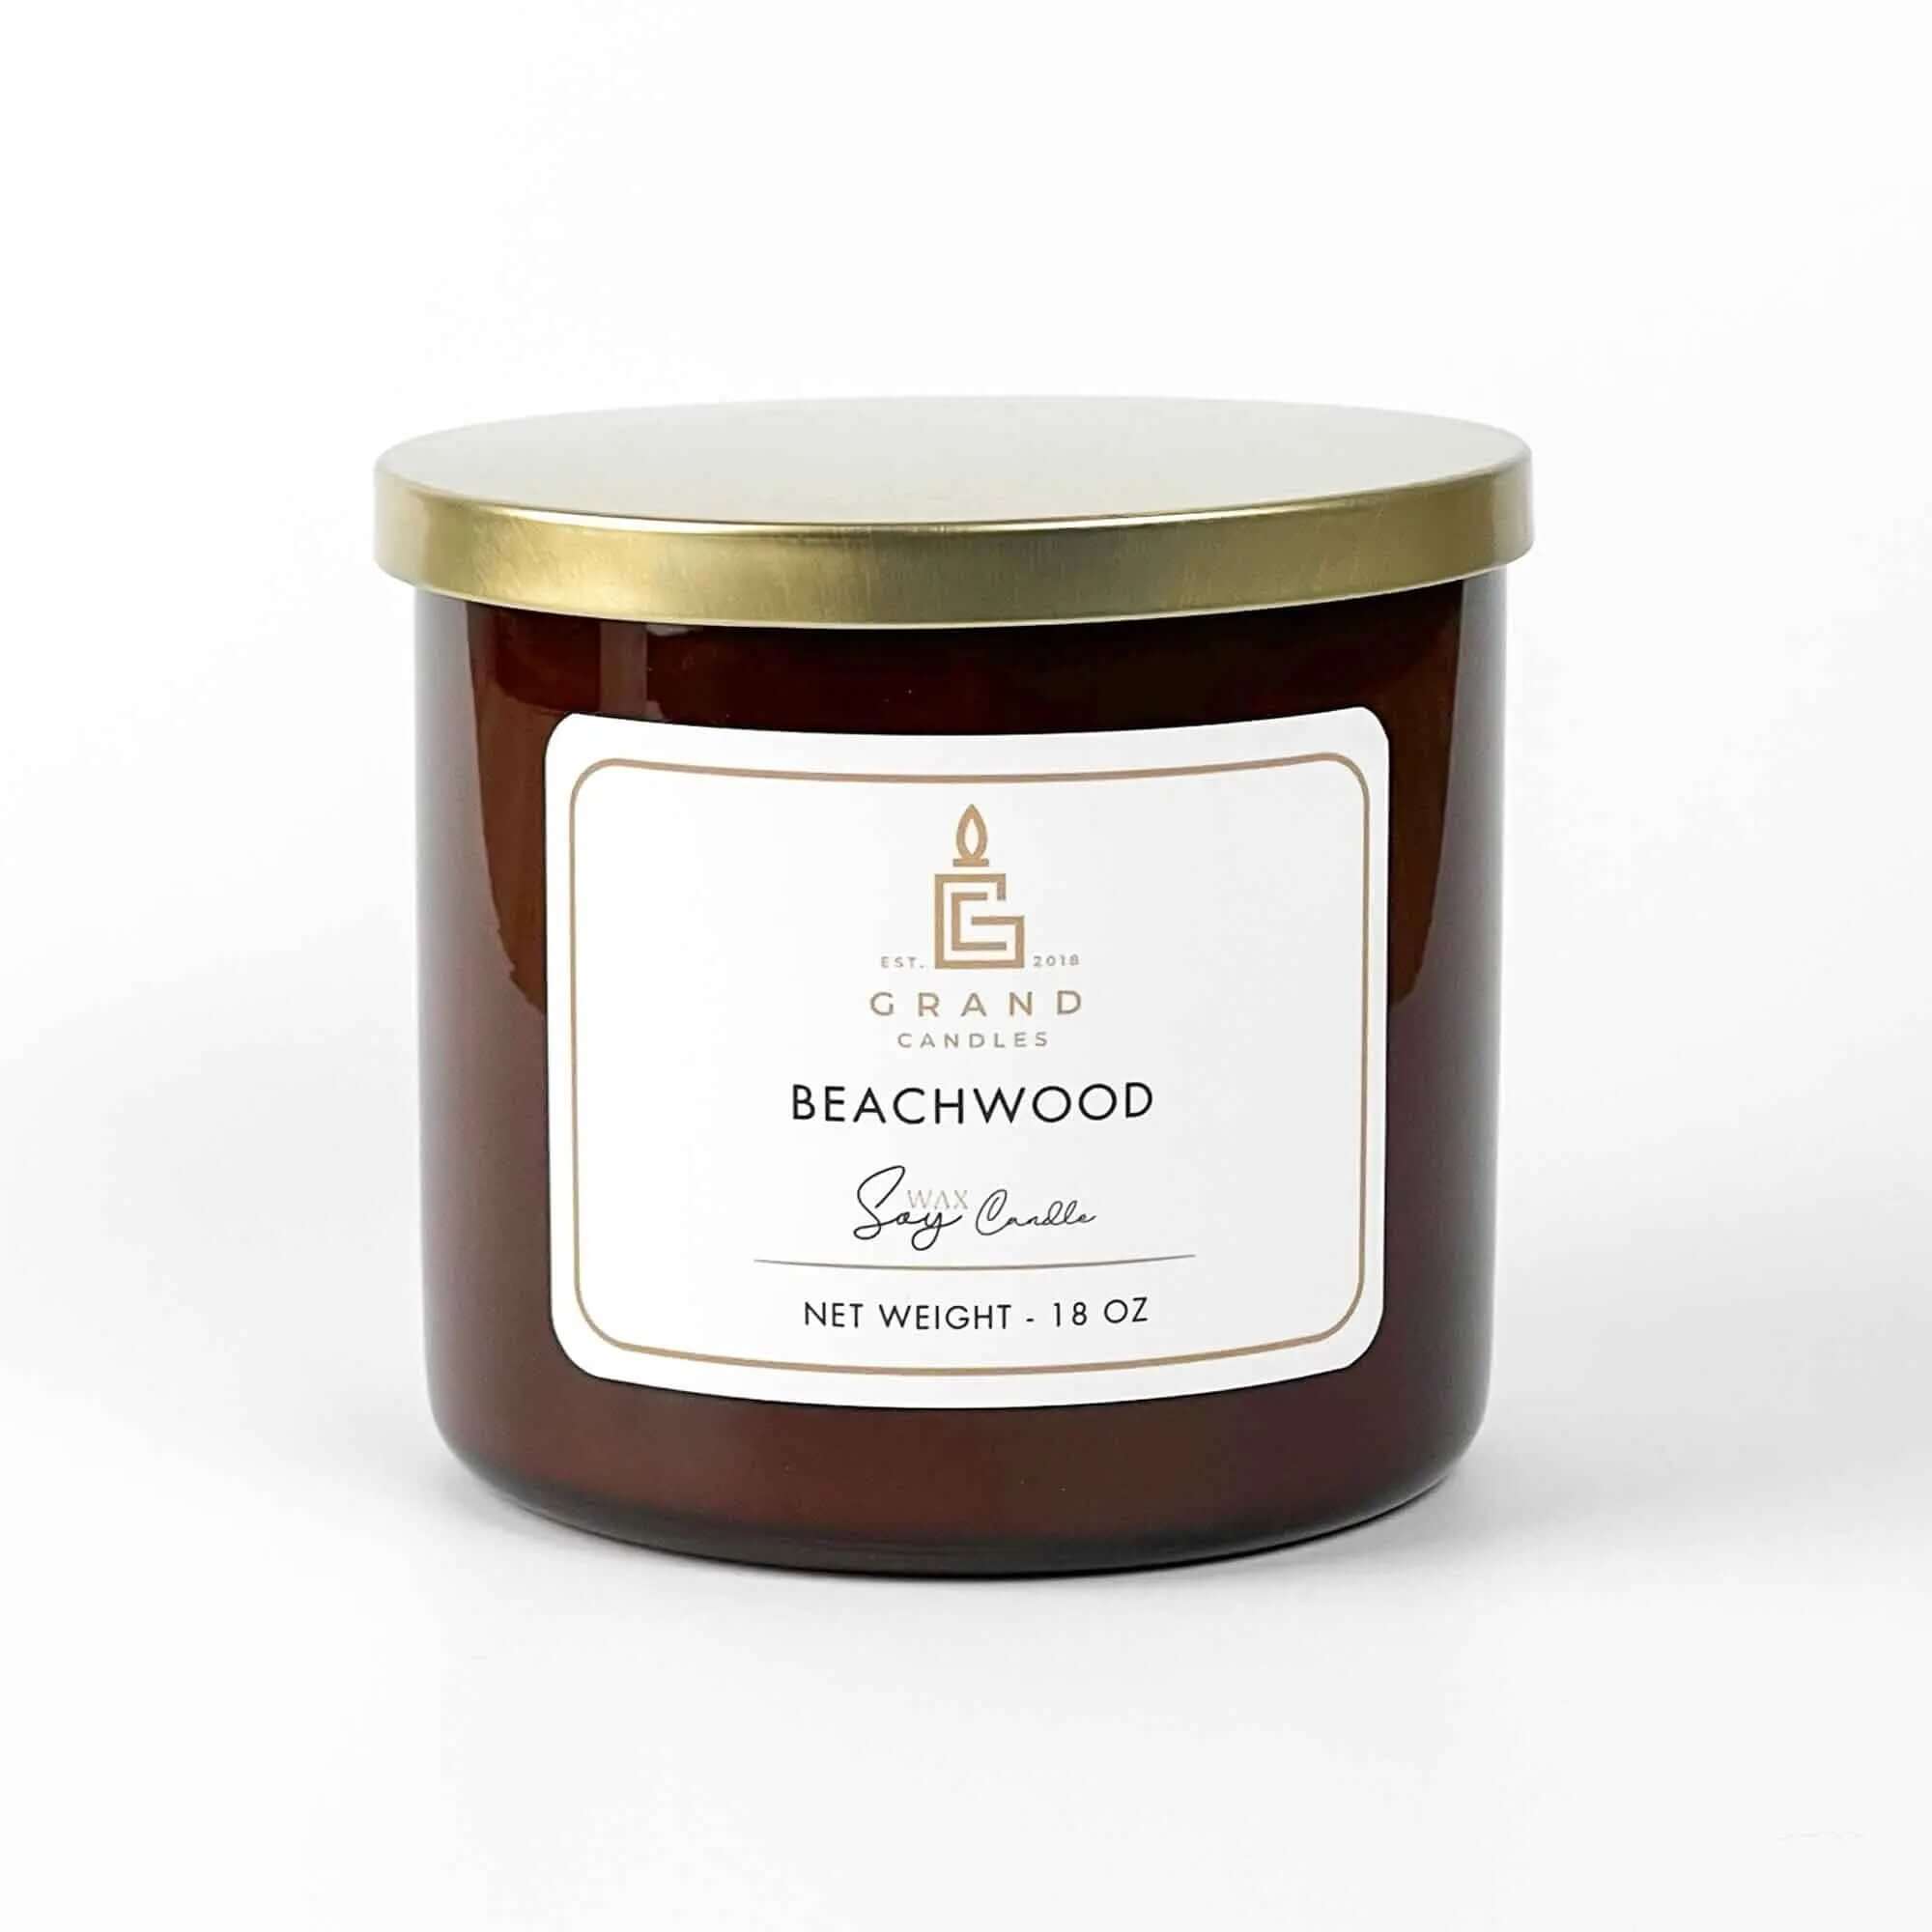 Soy Wax Candle | Beachwood Scented Soy Candle | Natural Home Scent for Relaxation and Ambiance